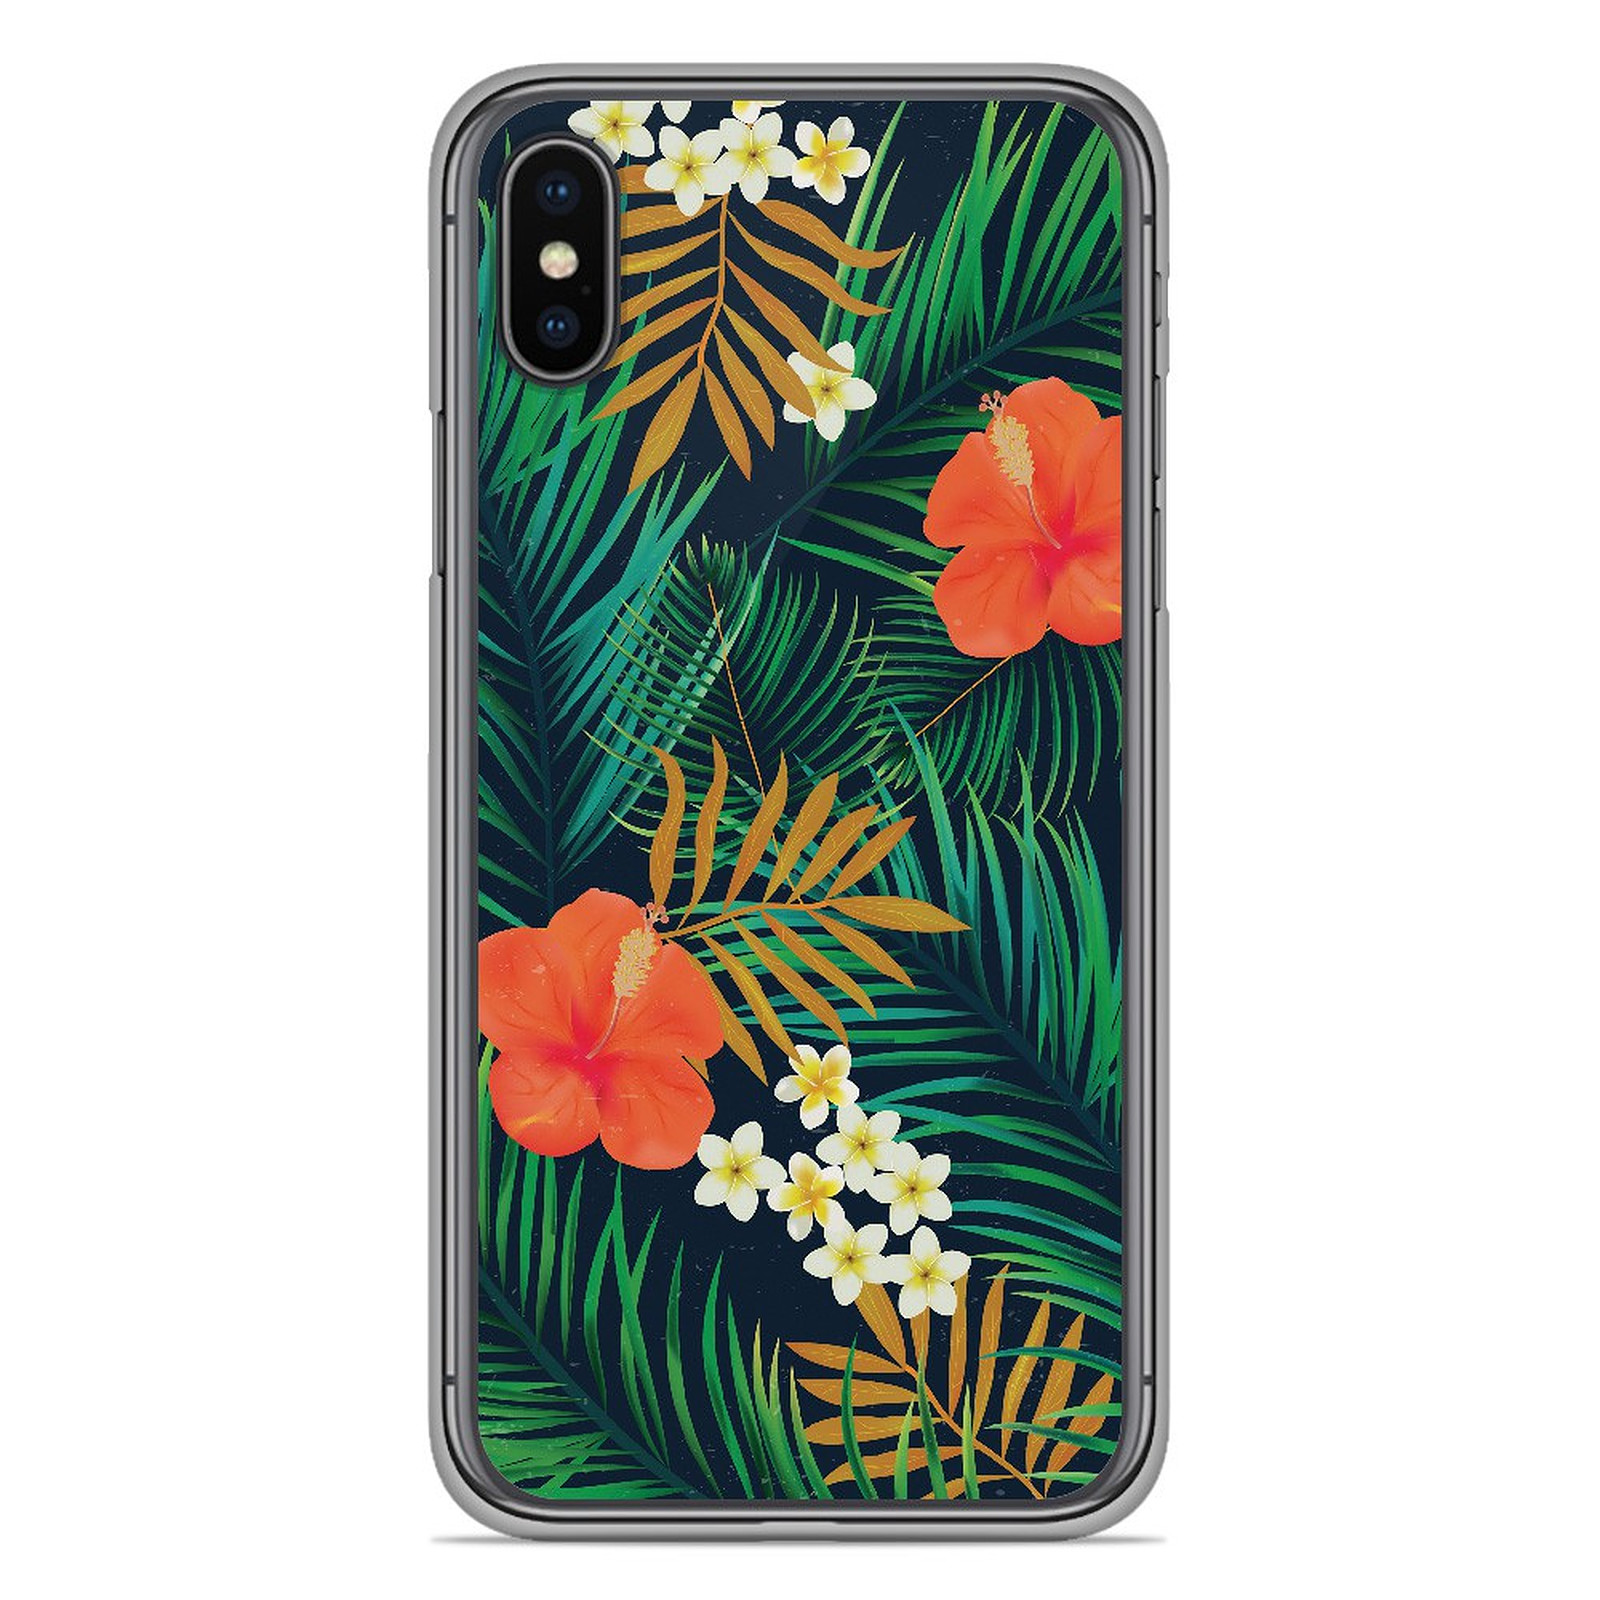 1001 Coques Coque silicone gel Apple iPhone X motif Tropical - Coque telephone 1001Coques